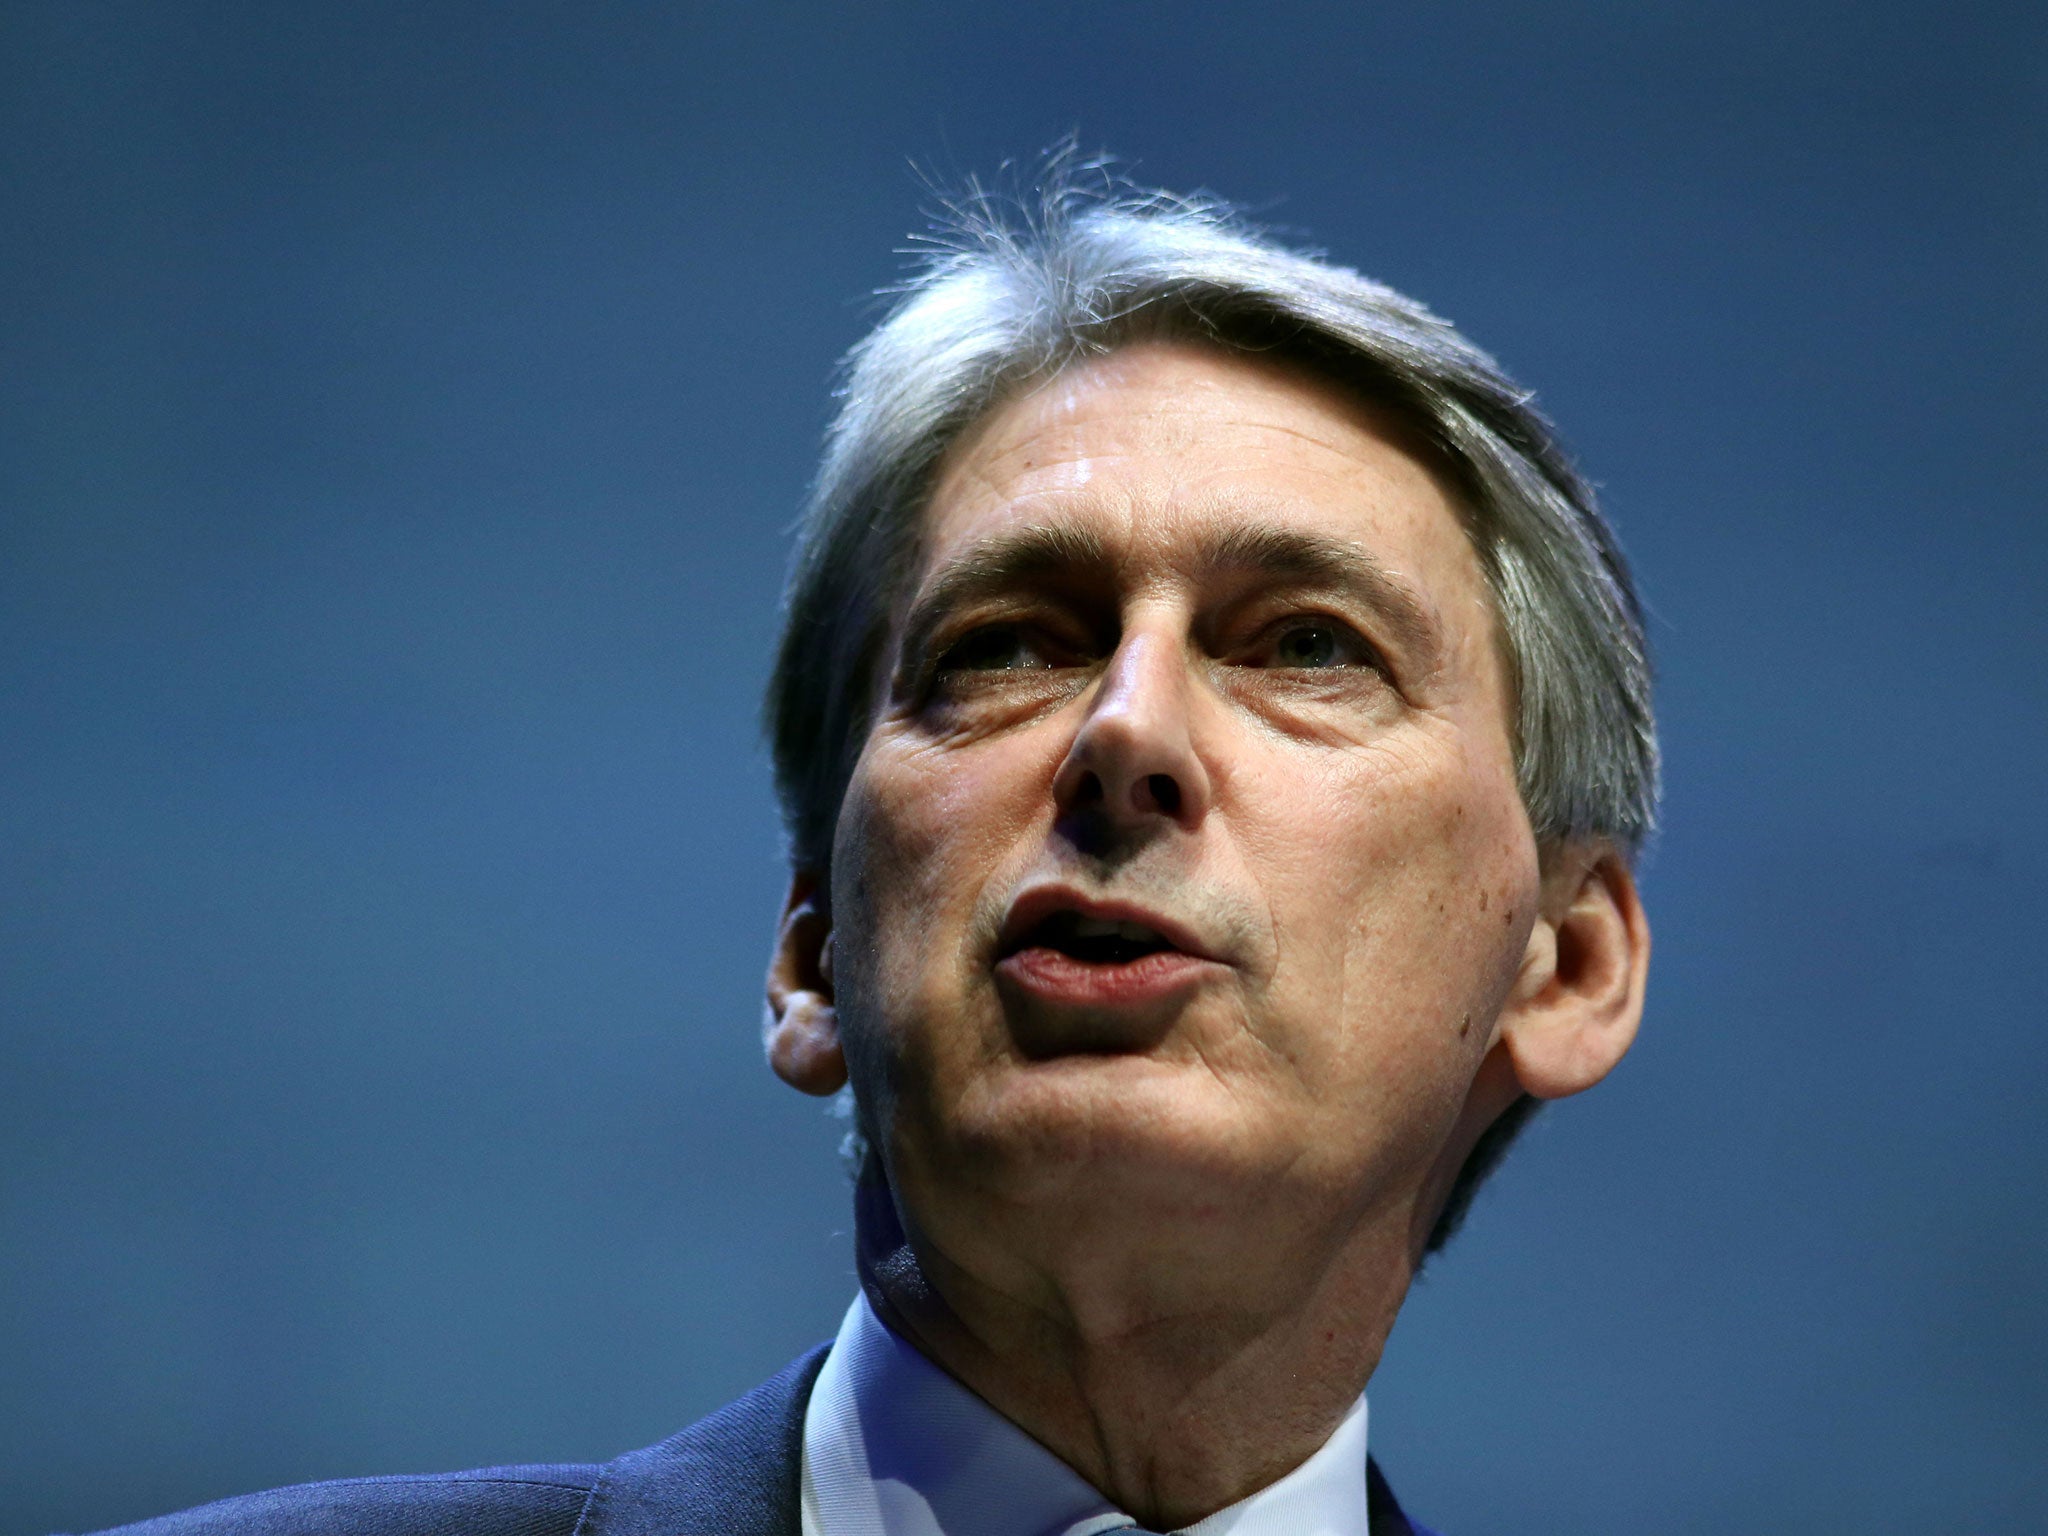 Chancellor Philip Hammond needs to find £20bn for the NHS while the economy struggles thanks to Brexit